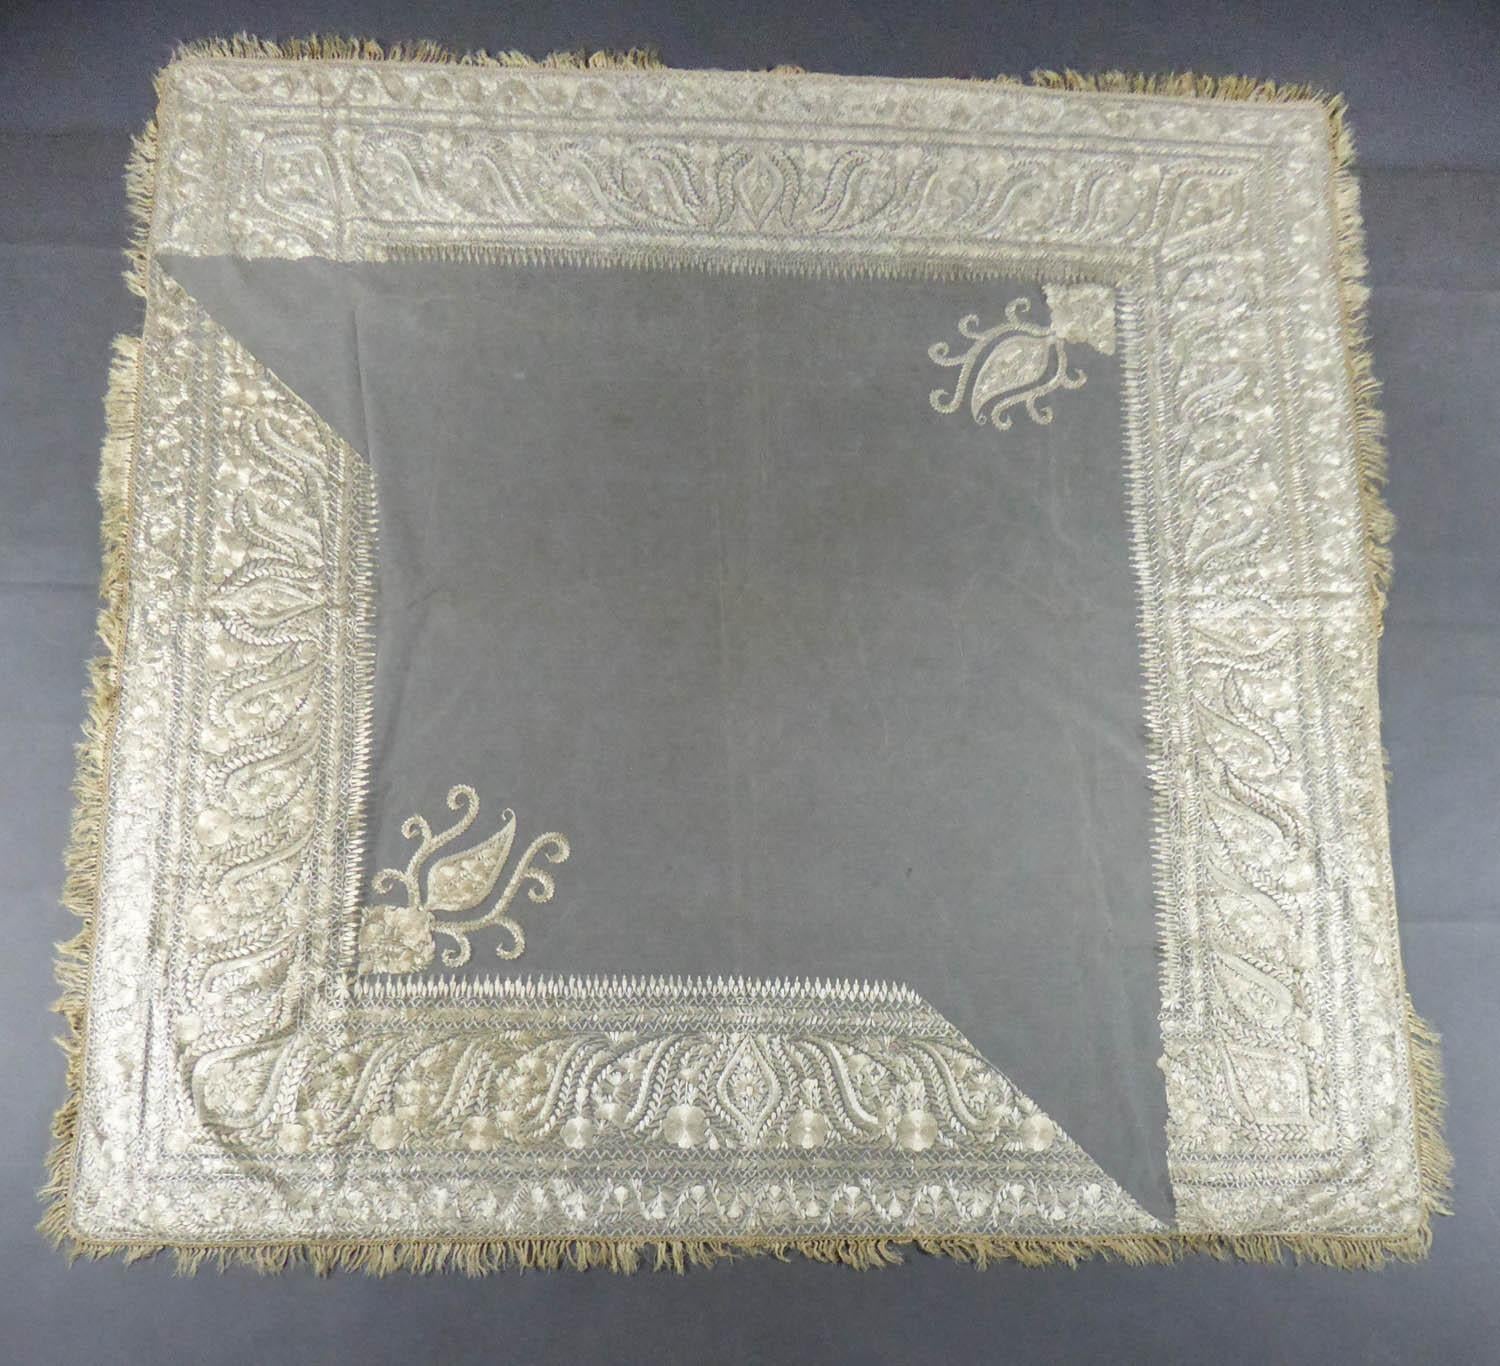 Circa 1840
India for fashion in Europe

Square turn-over shawl in cotton tulle embroidered in Delhi in the mid-nineteenth century and exported for fashion in Europe. Background in very fine cream cotton tulle embroidered with silver cream floss-silk